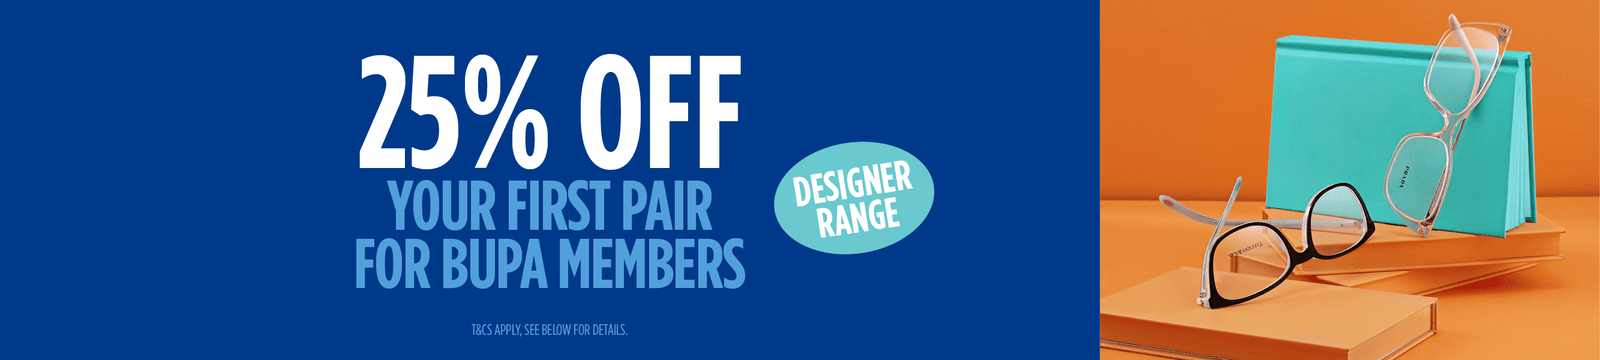 25% off first pair from our Designer Range for all Bupa members (includes frames plus standard single vision lenses with scratch resistant coating, plus a tint for sunglasses). Lens type upgrades and add-ons may be an additional cost.